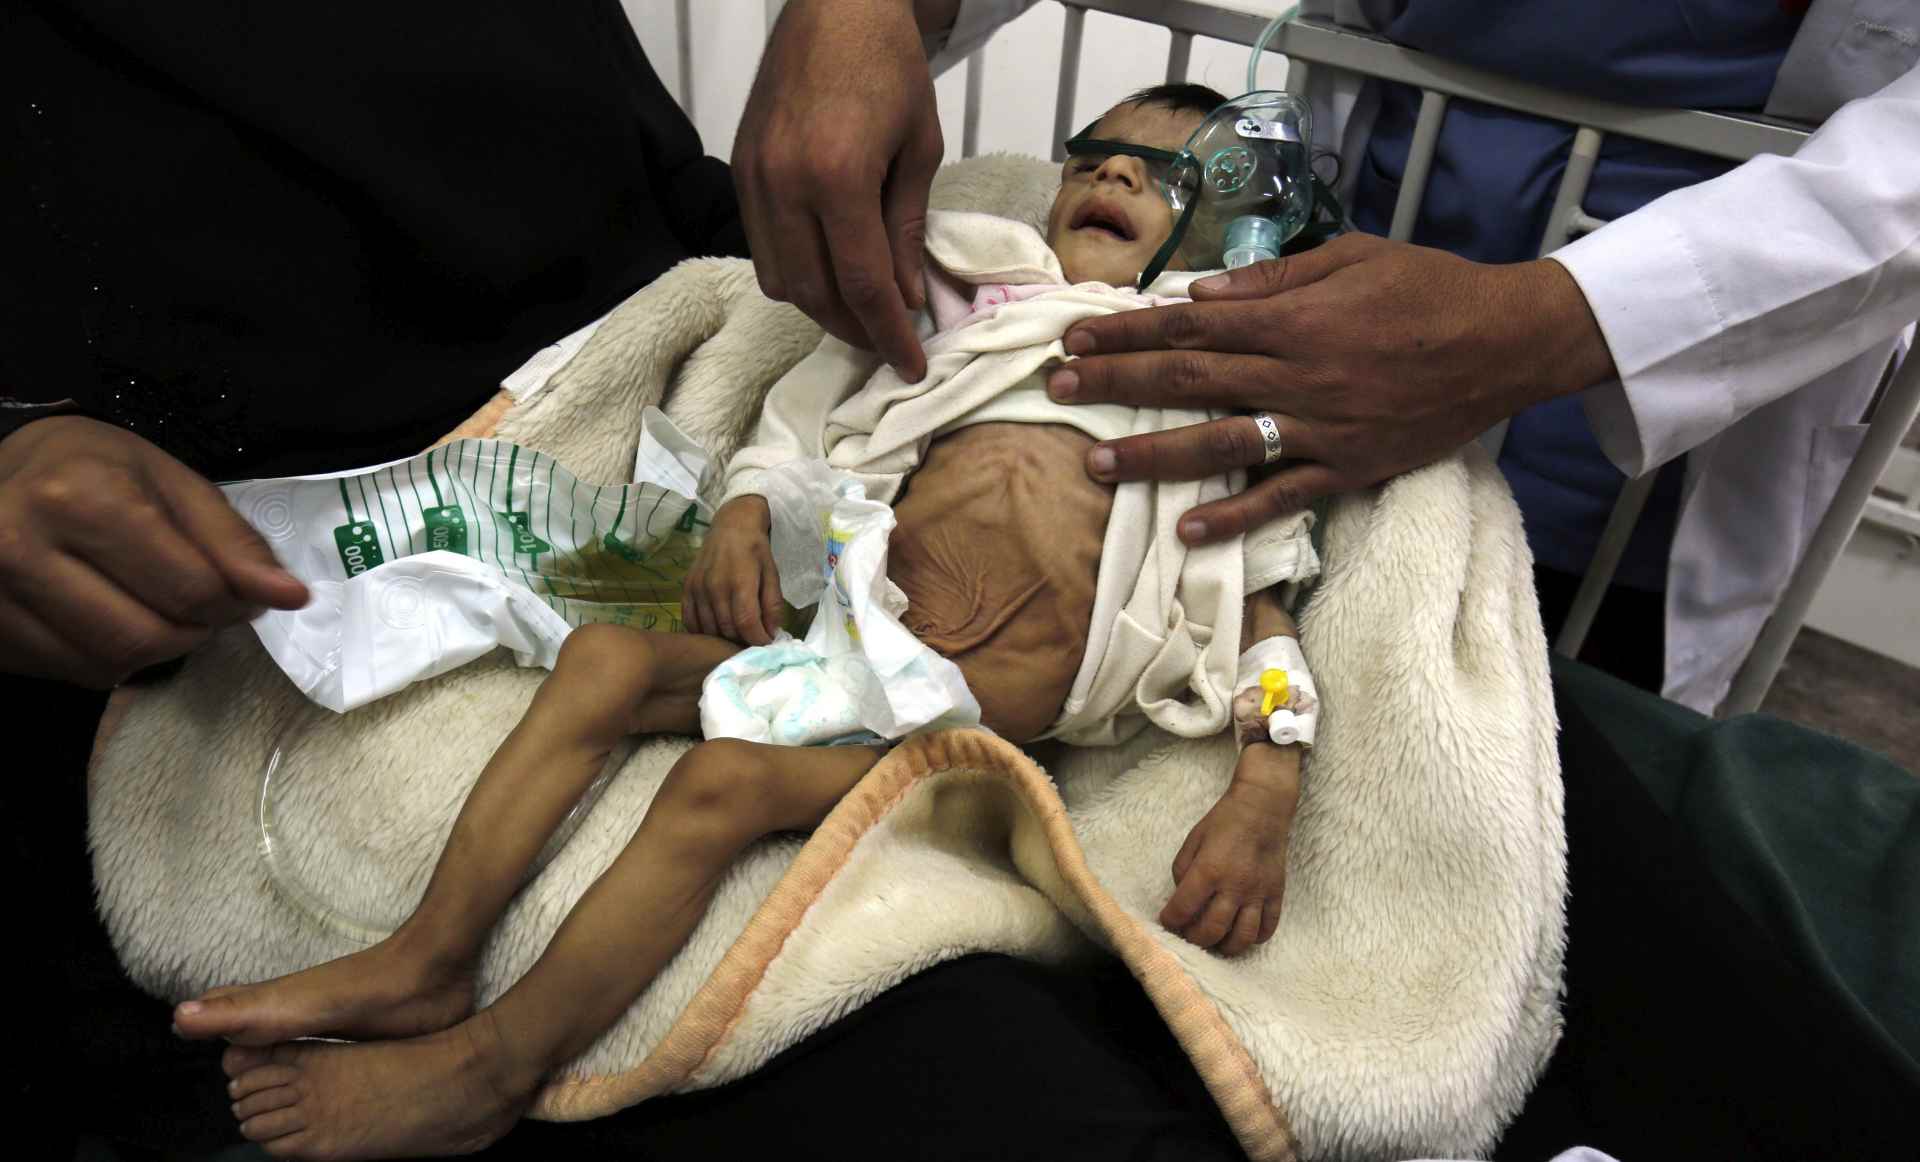 epa05732190 A picture made available on 19 January 2017 shows a Yemeni child, suffering from malnutrition, receiving treatment at a hospital in Sana'a, Yemen, 18 January 2017. According to reports, the UN children's fund UNICEF has reported that at least 462,000 Yemeni children are suffering from severe acute malnutrition, as food supplies have been disrupted by the nearly two-year escalating conflict between Yemen's Saudi-backed government forces and Houthi militias.  EPA/YAHYA ARHAB